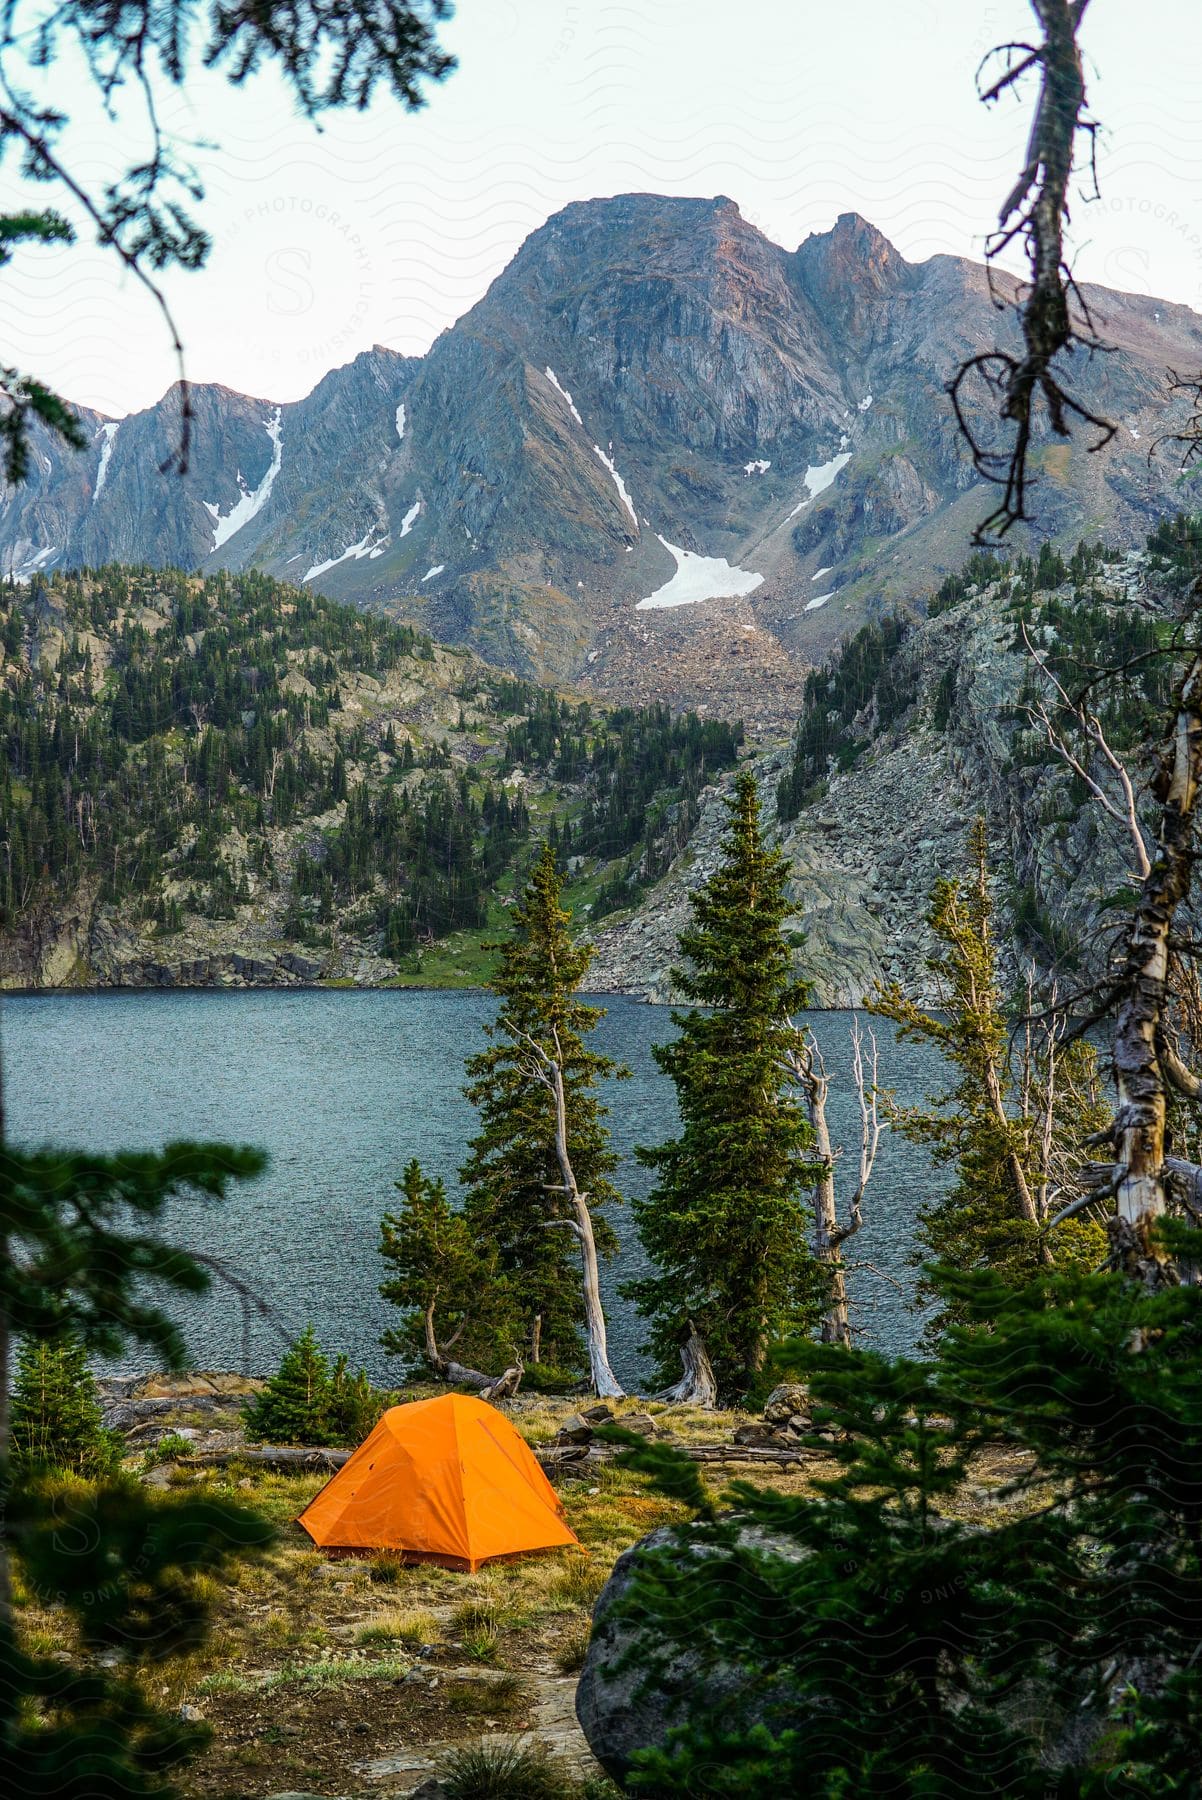 Camping tent by lakeside with mountains in background